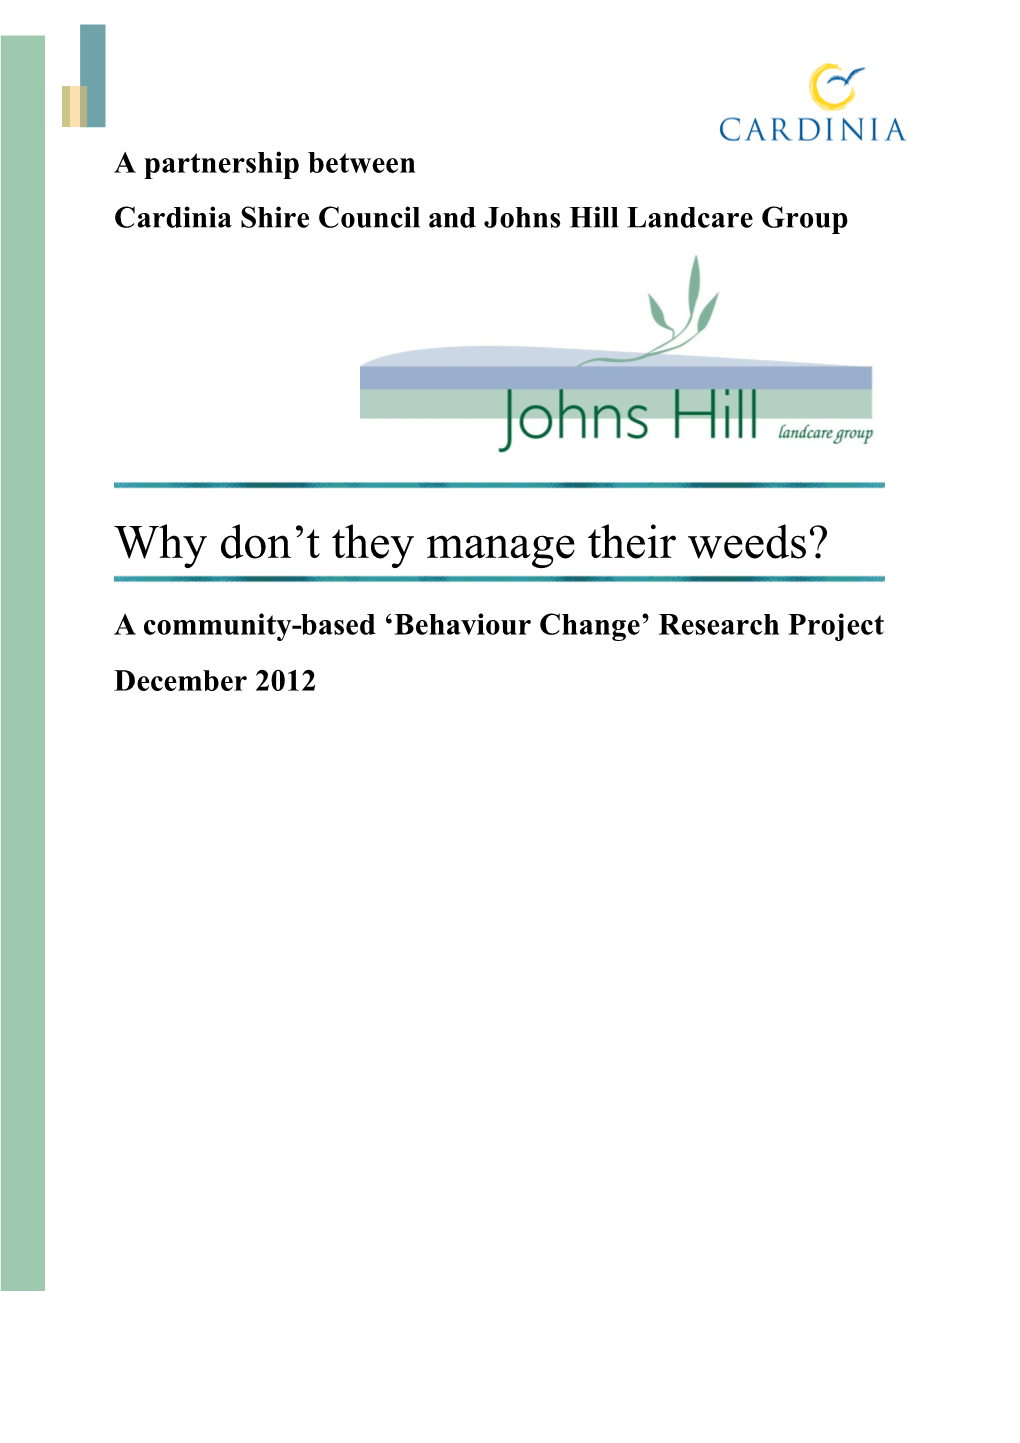 Cardinia Shire Council and Johns Hill Landcare Group